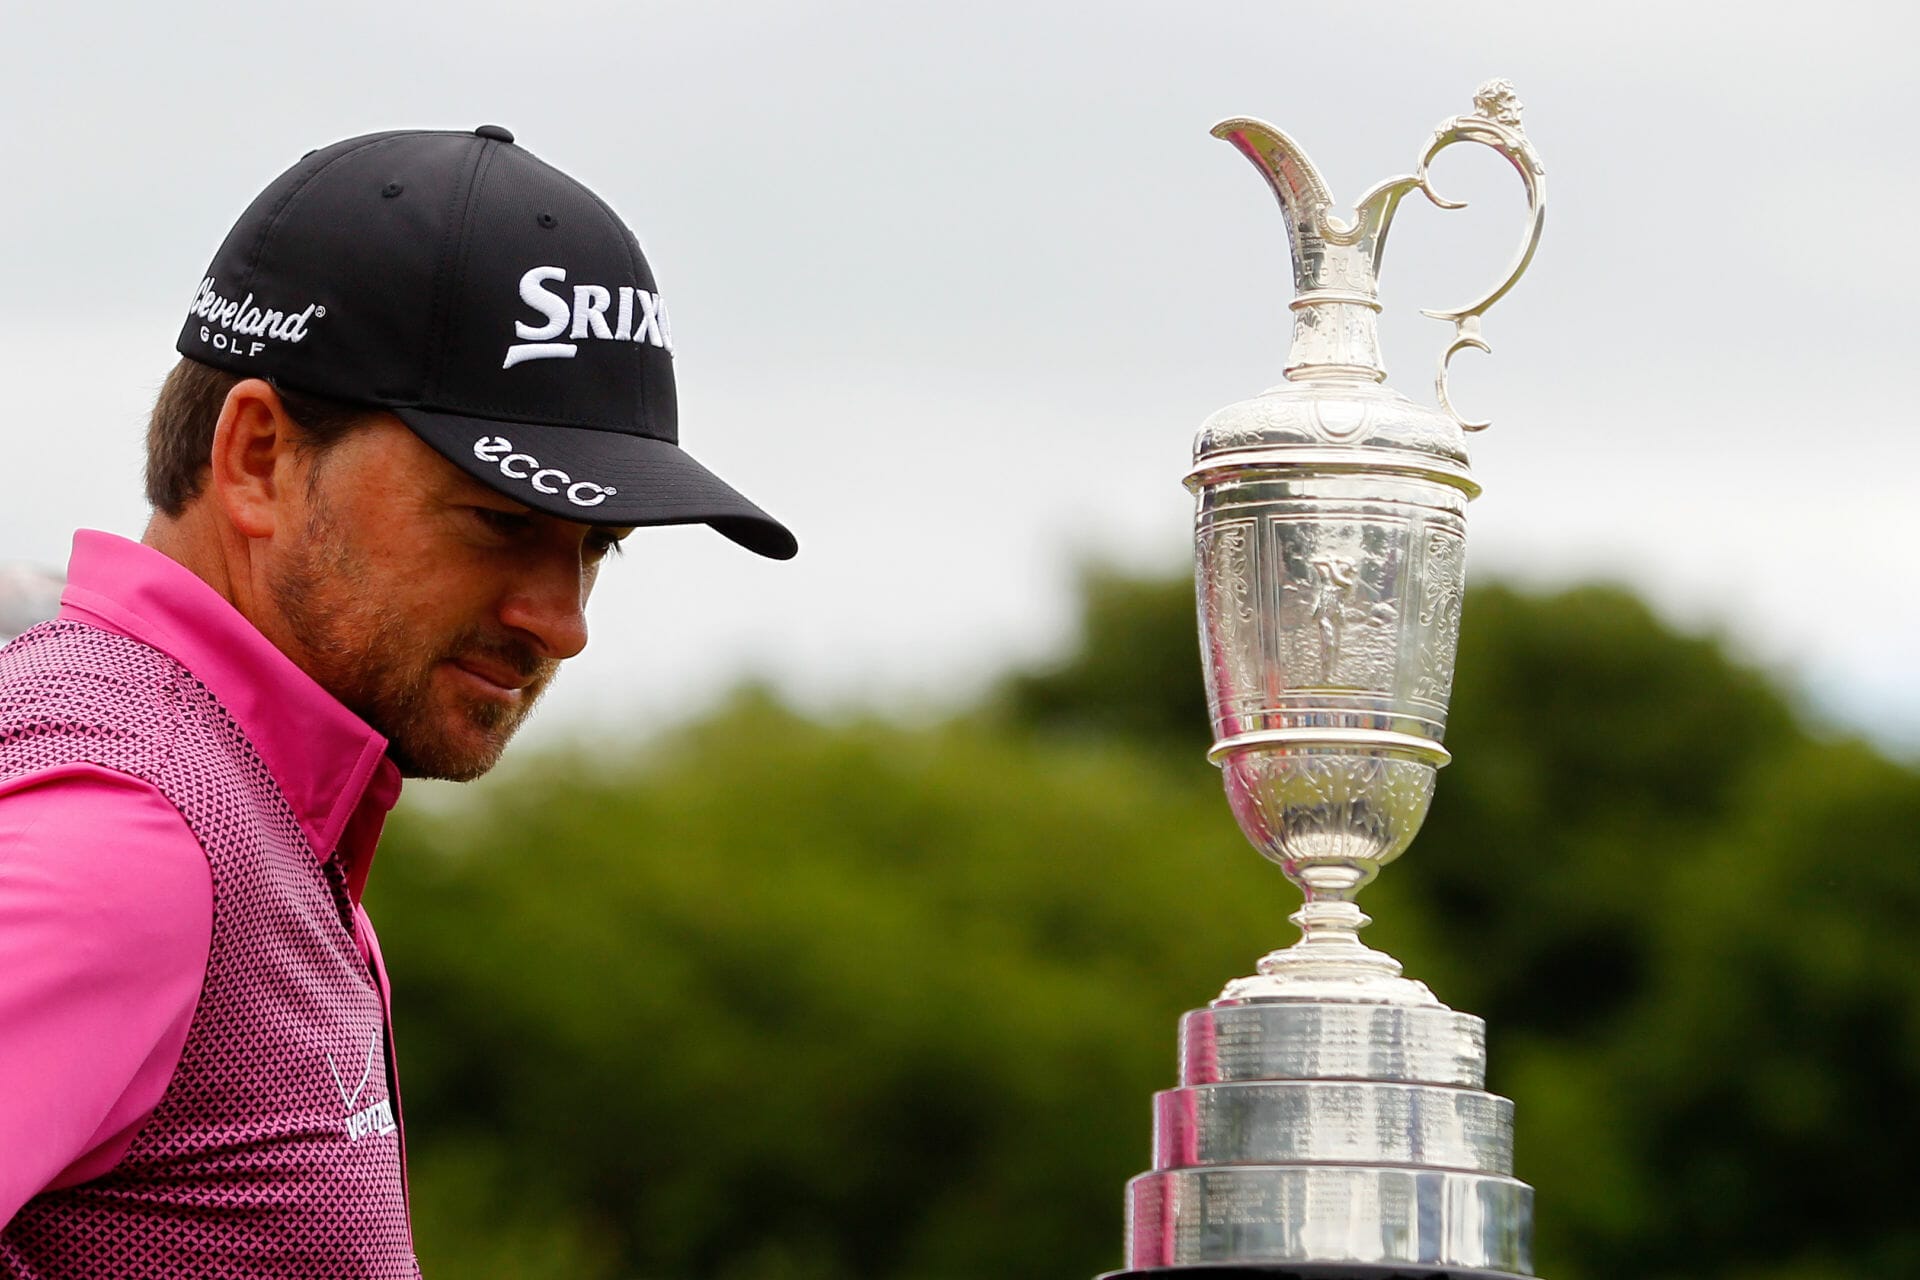 McIlroy full of praise for McDowell for qualifying for The Open Championship